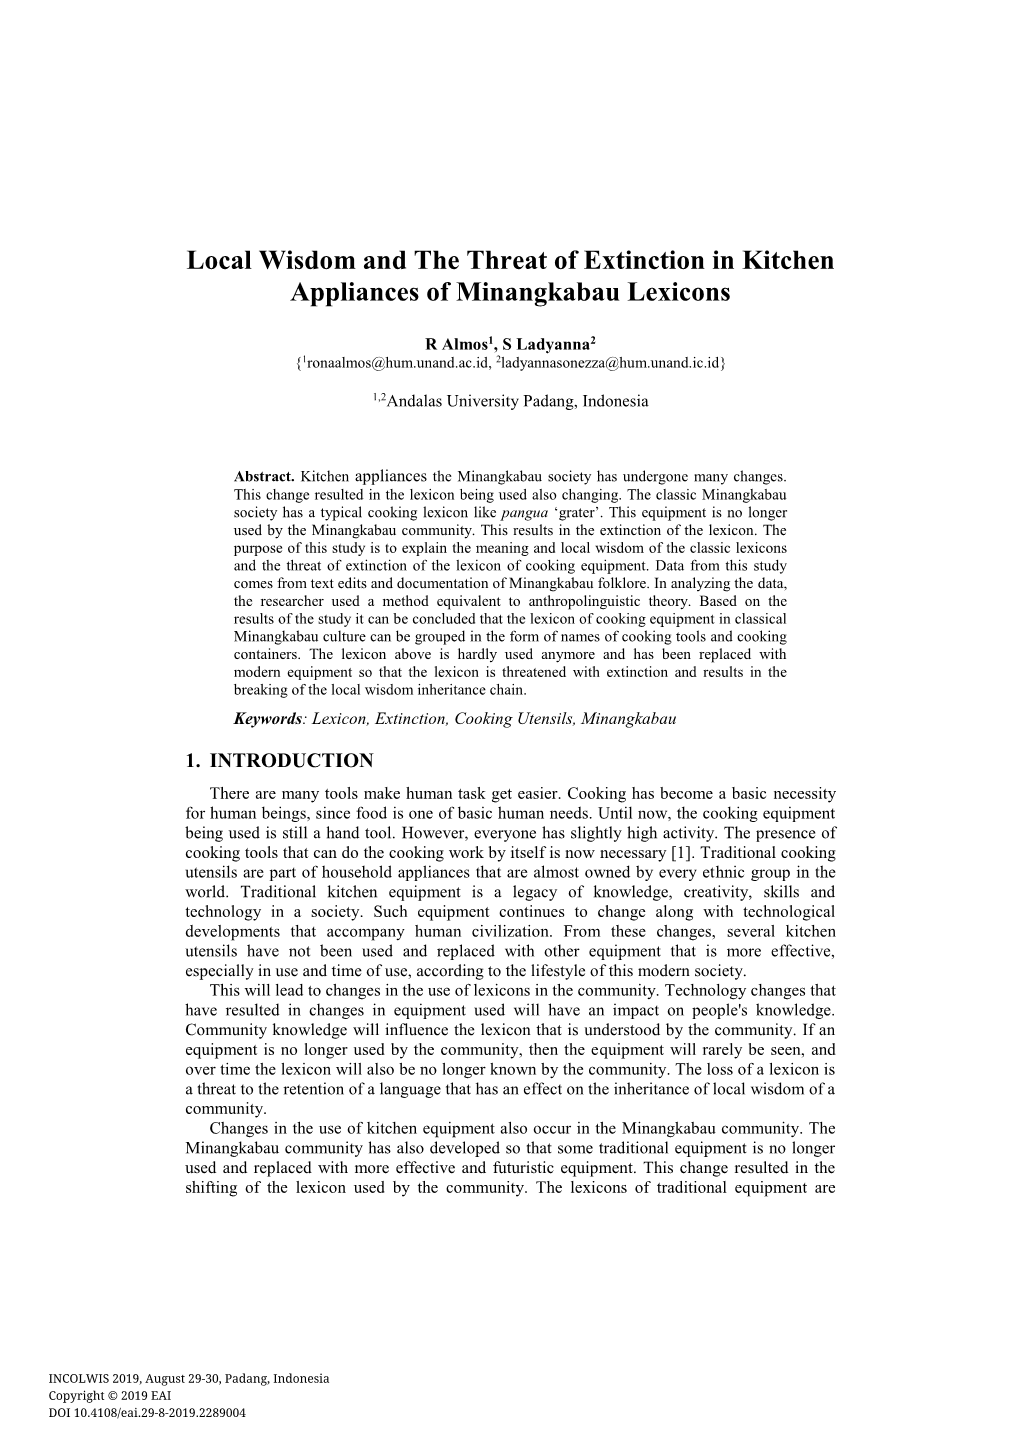 Local Wisdom and the Threat of Extinction in Kitchen Appliances of Minangkabau Lexicons